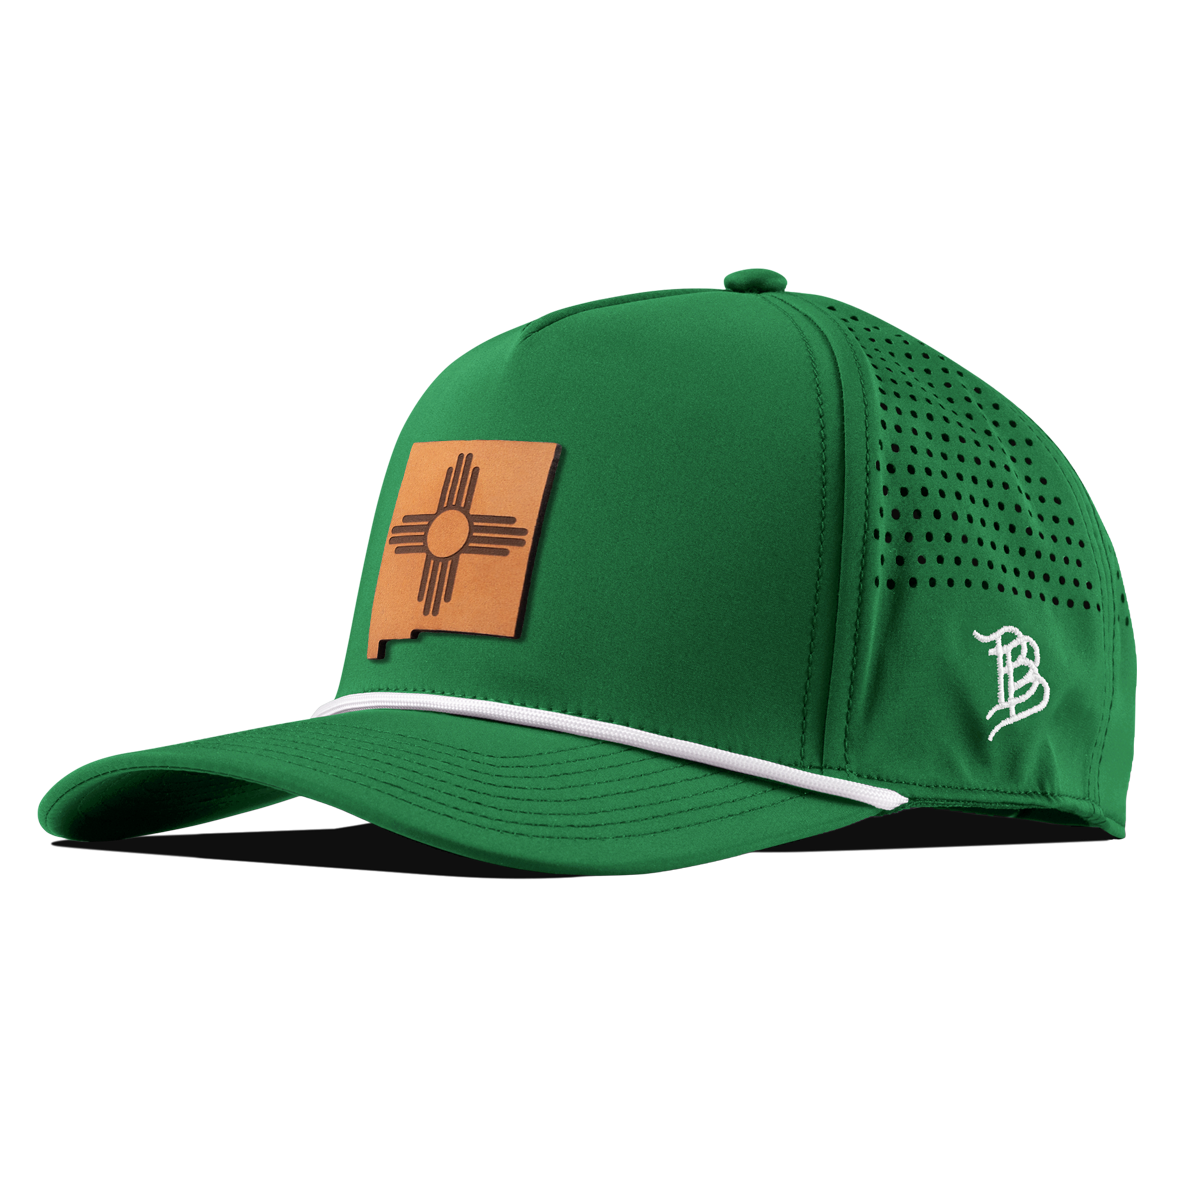 New Mexico 47 Tan Curved 5 Panel Rope Kelly Green 